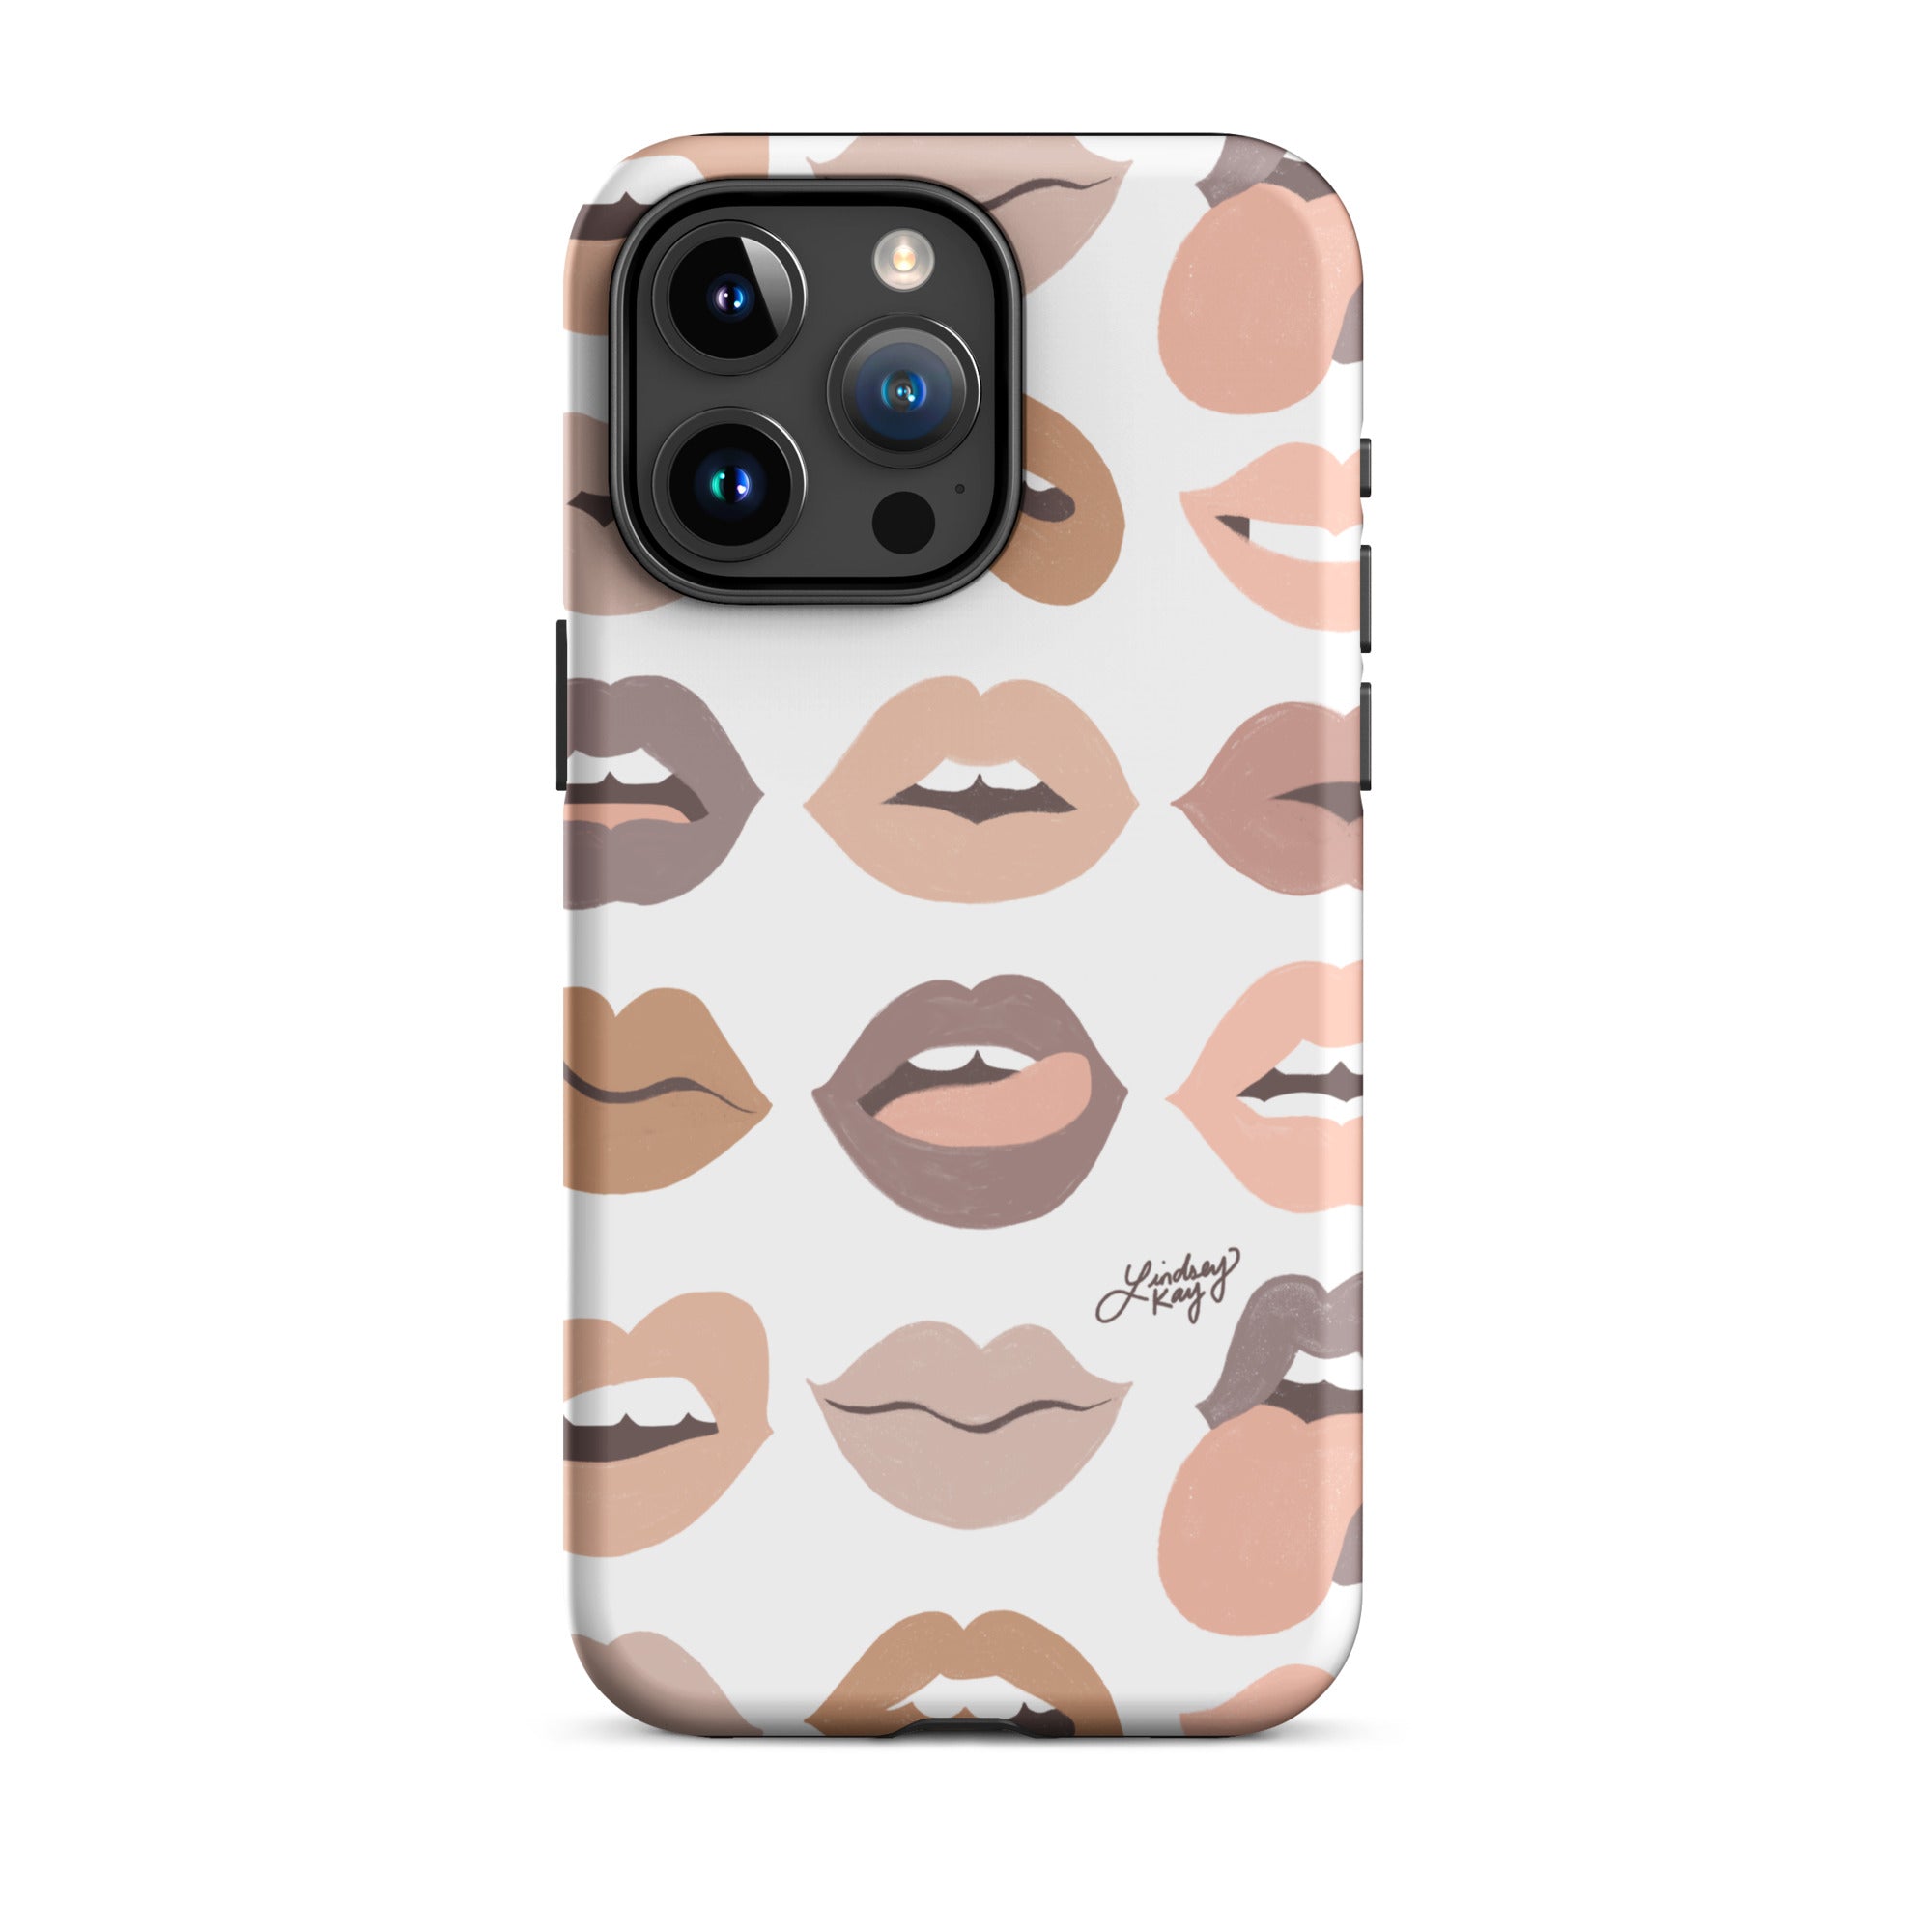 lips of love neutral illustration iphone 15 case cover mobile accessories trendy fun cute